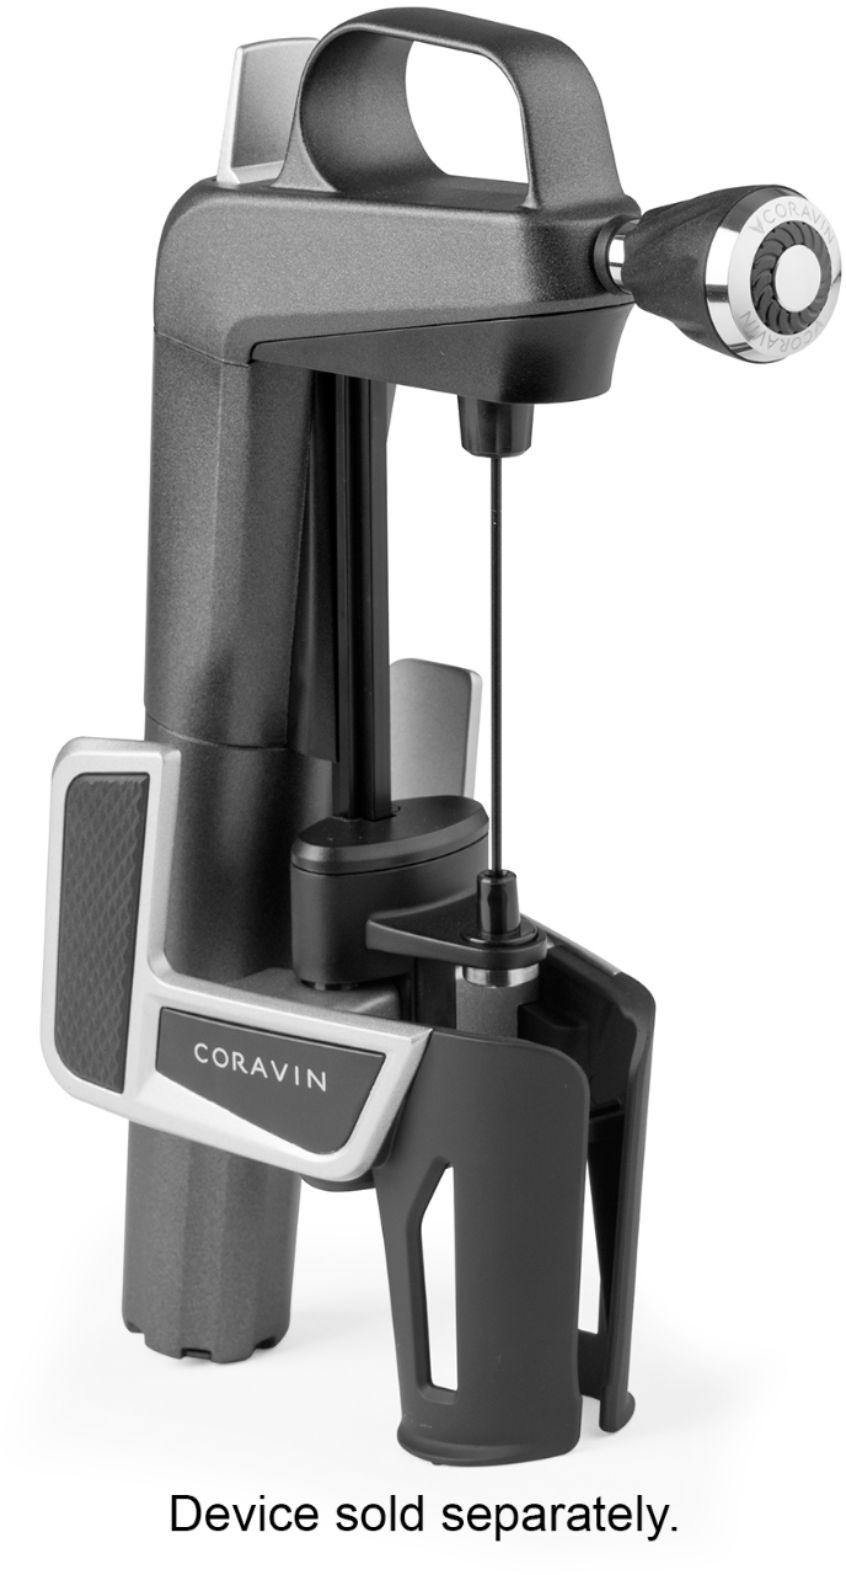 Coravin Aerator Black and Silver 802013 - Best Buy